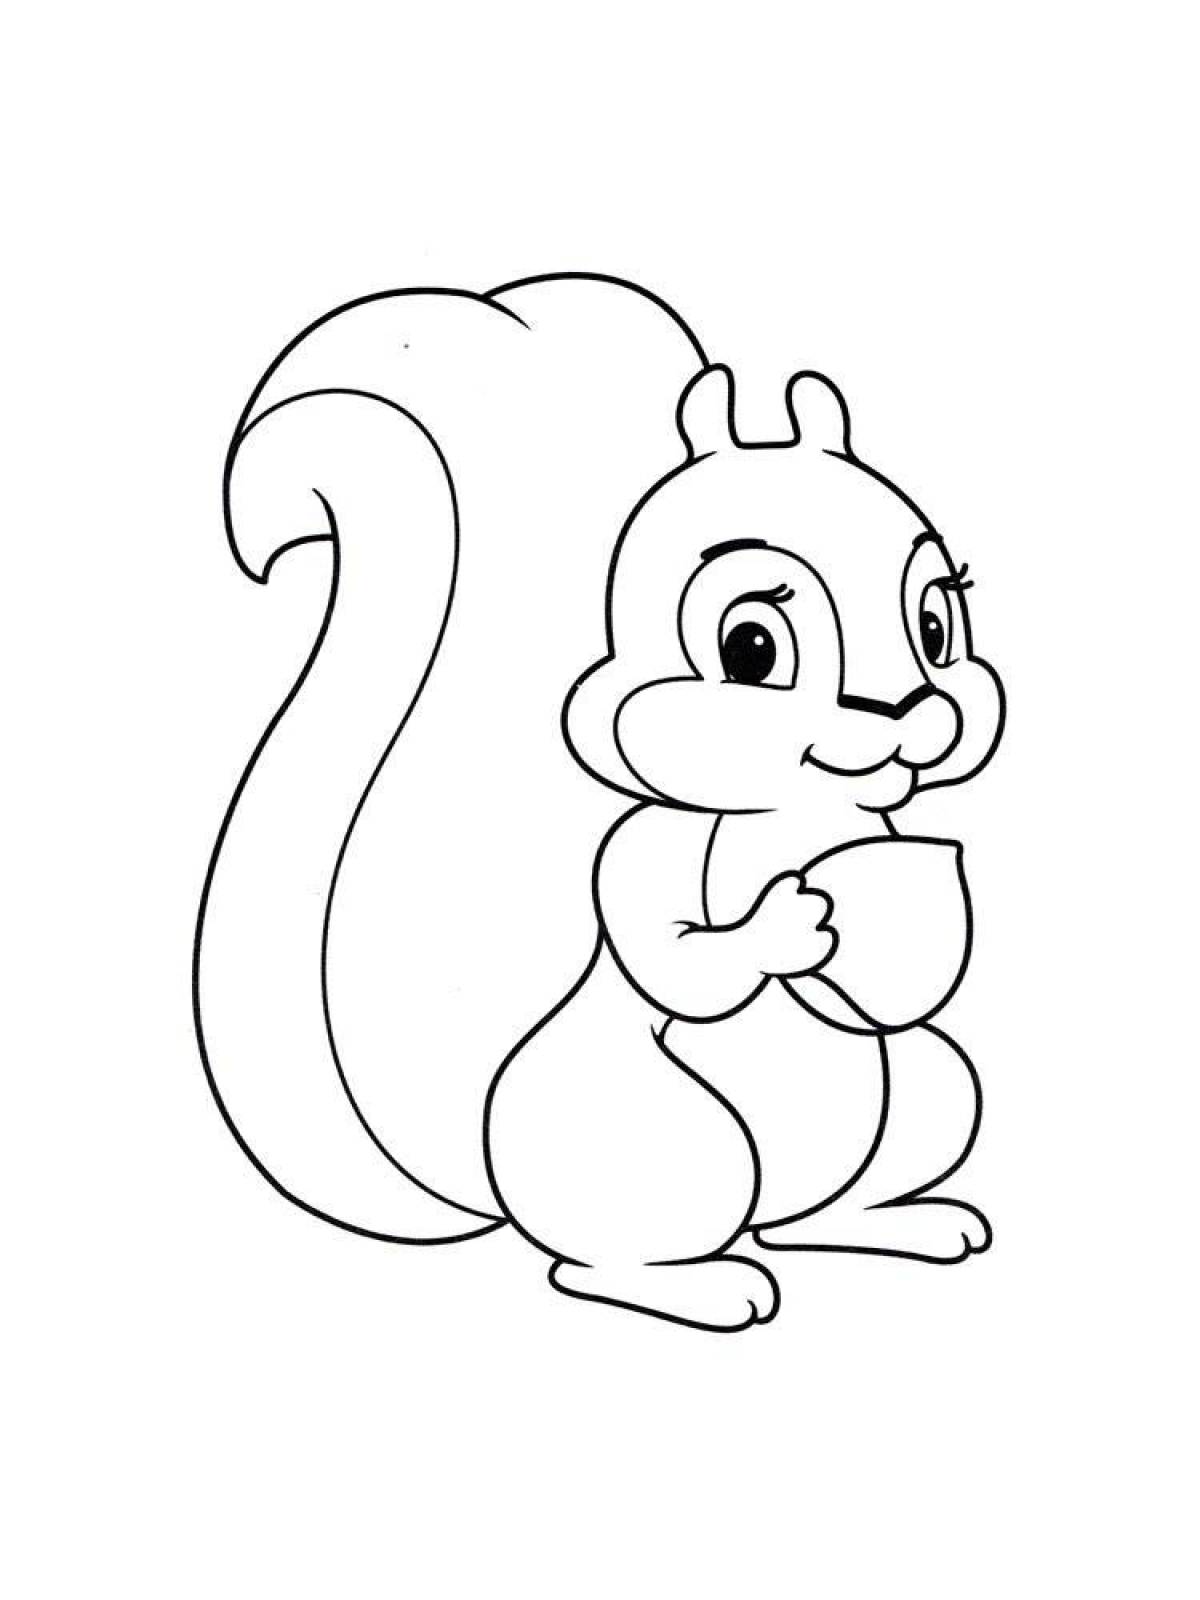 Coloring squirrel for children